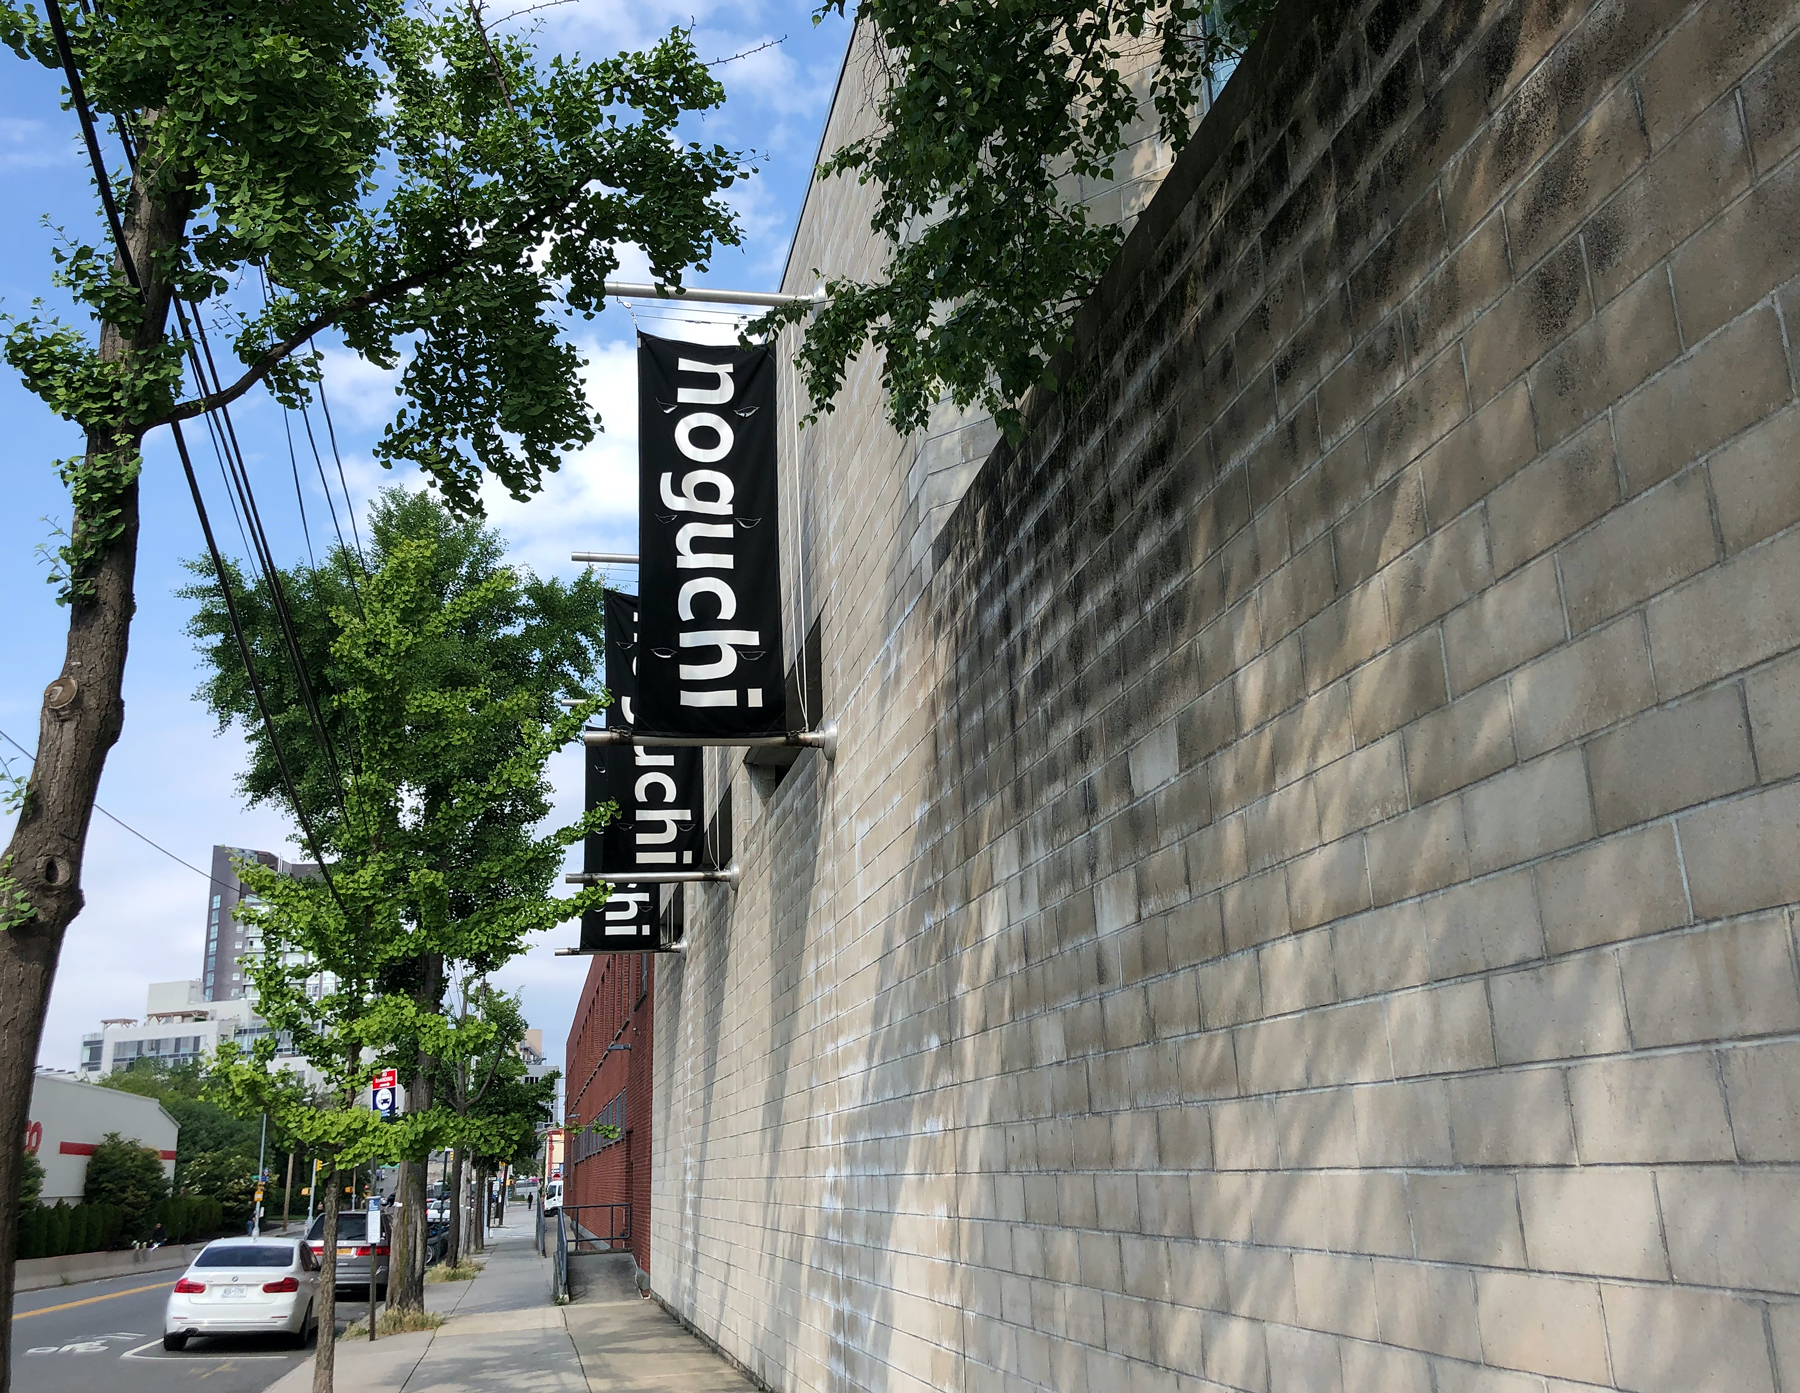 Noguchi Museum's open call for Artist Banners